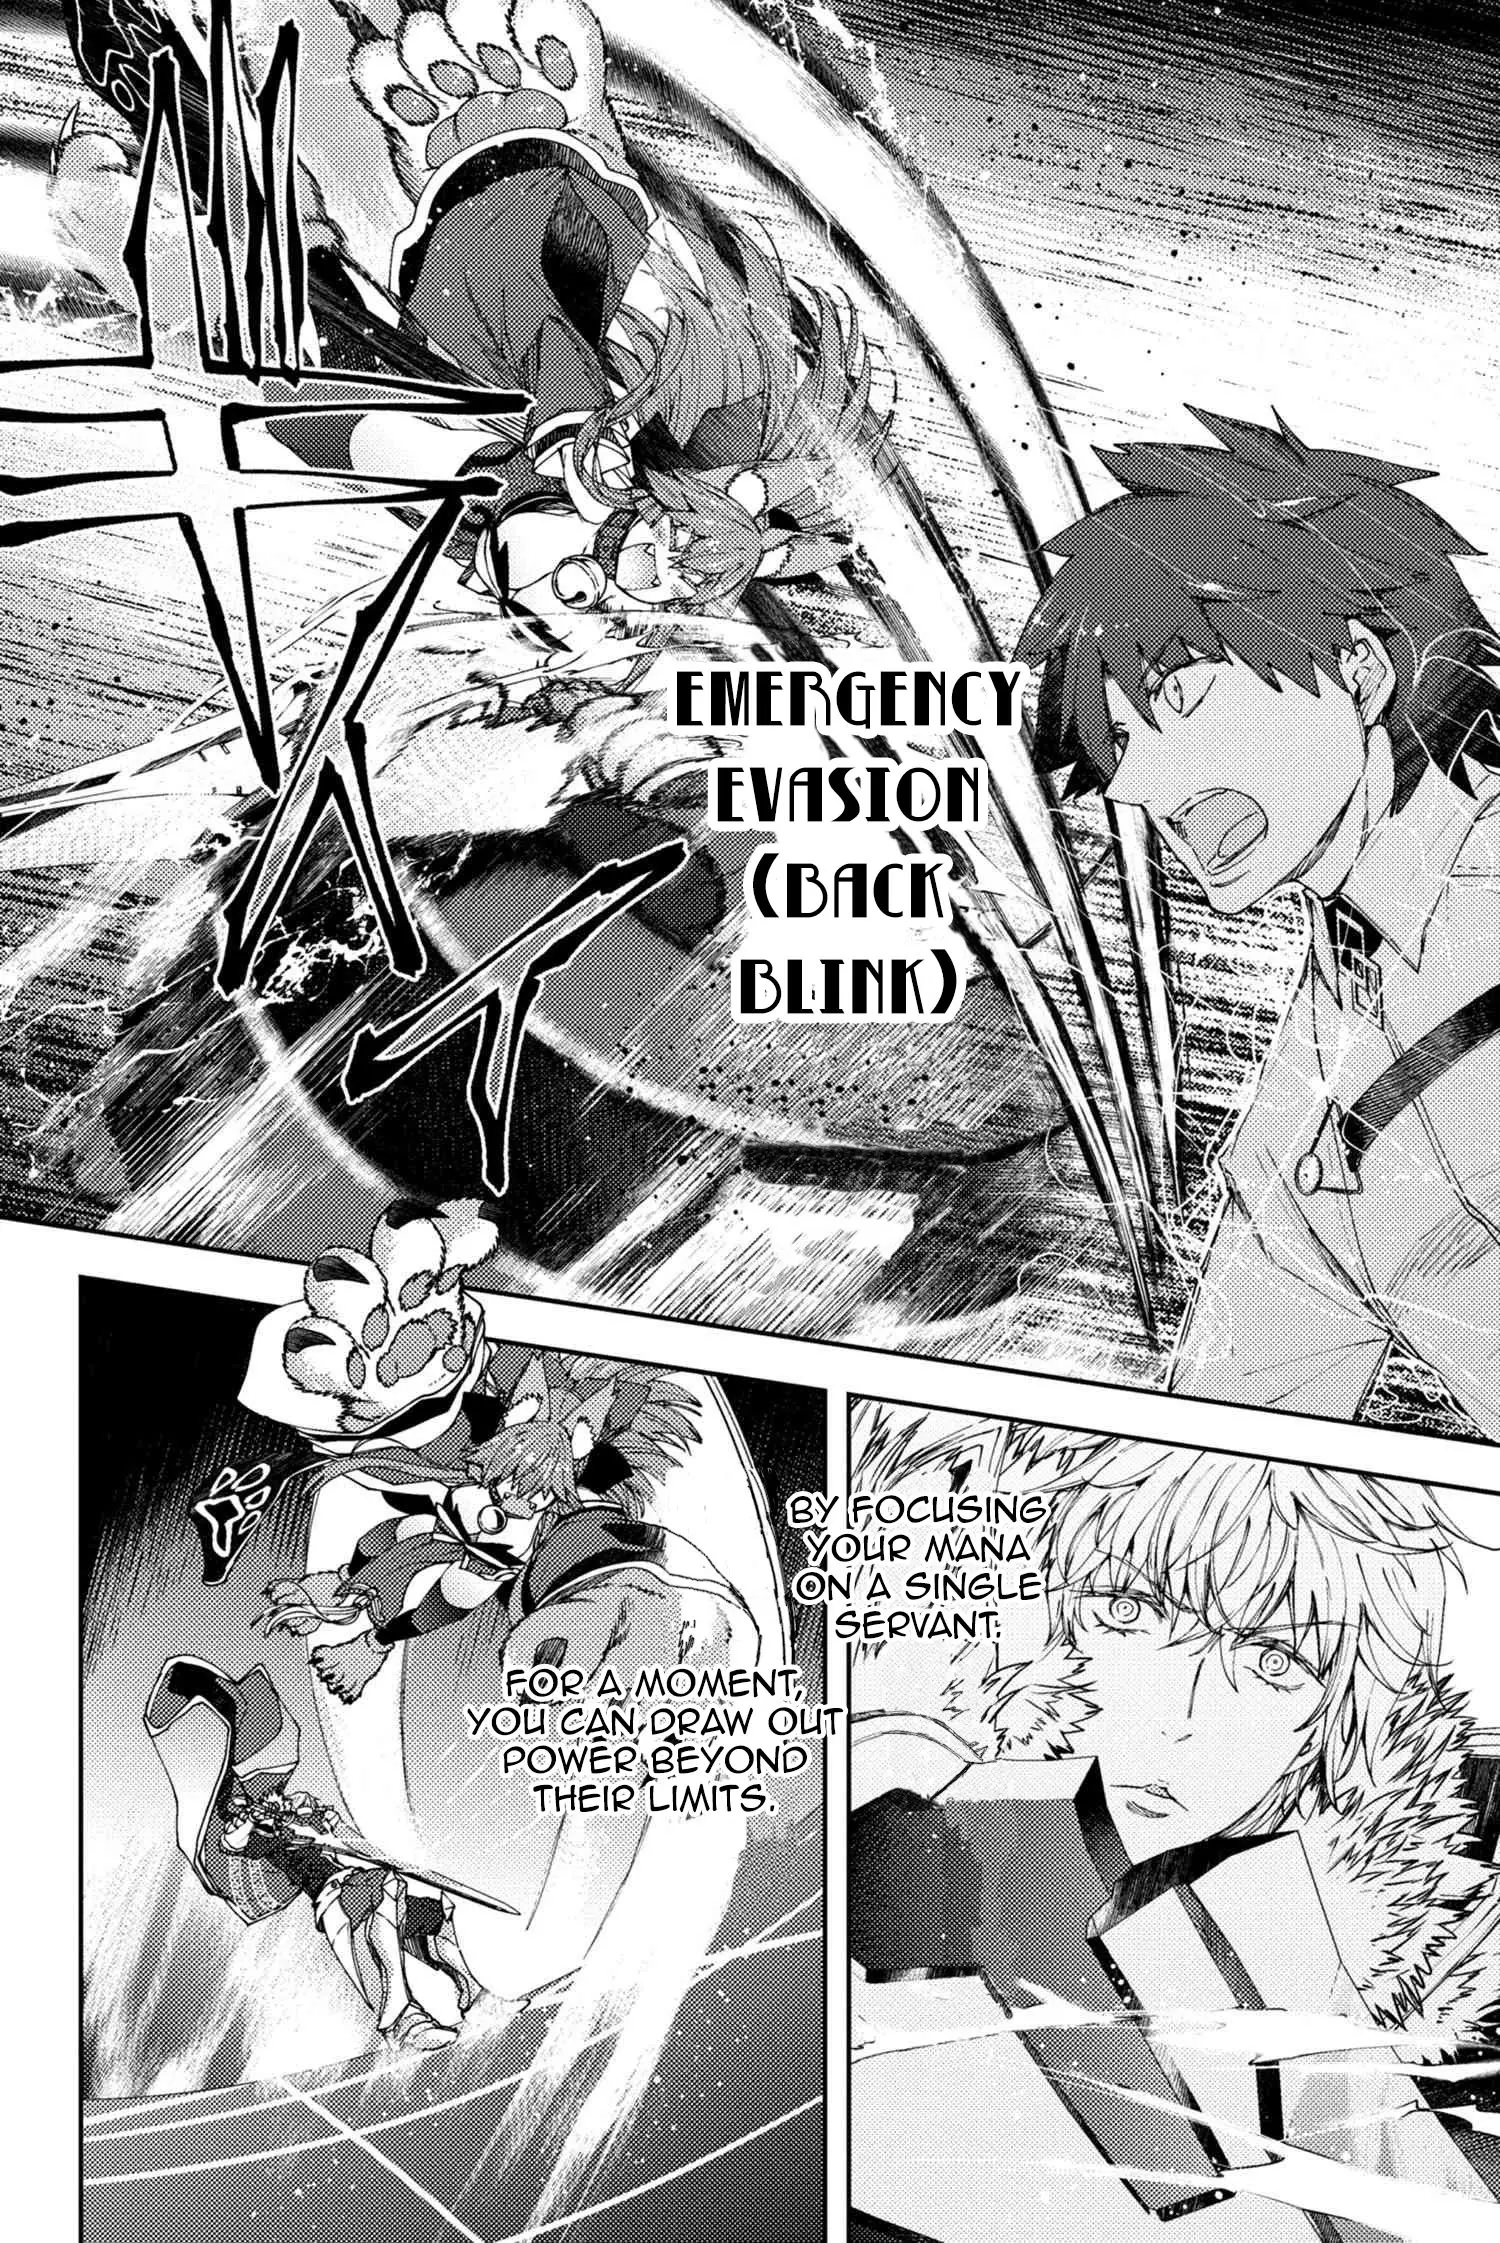 Fate/grand Order -Epic Of Remnant- Deep Sea Cyber-Paradise Se.ra.ph - 13.2 page 10